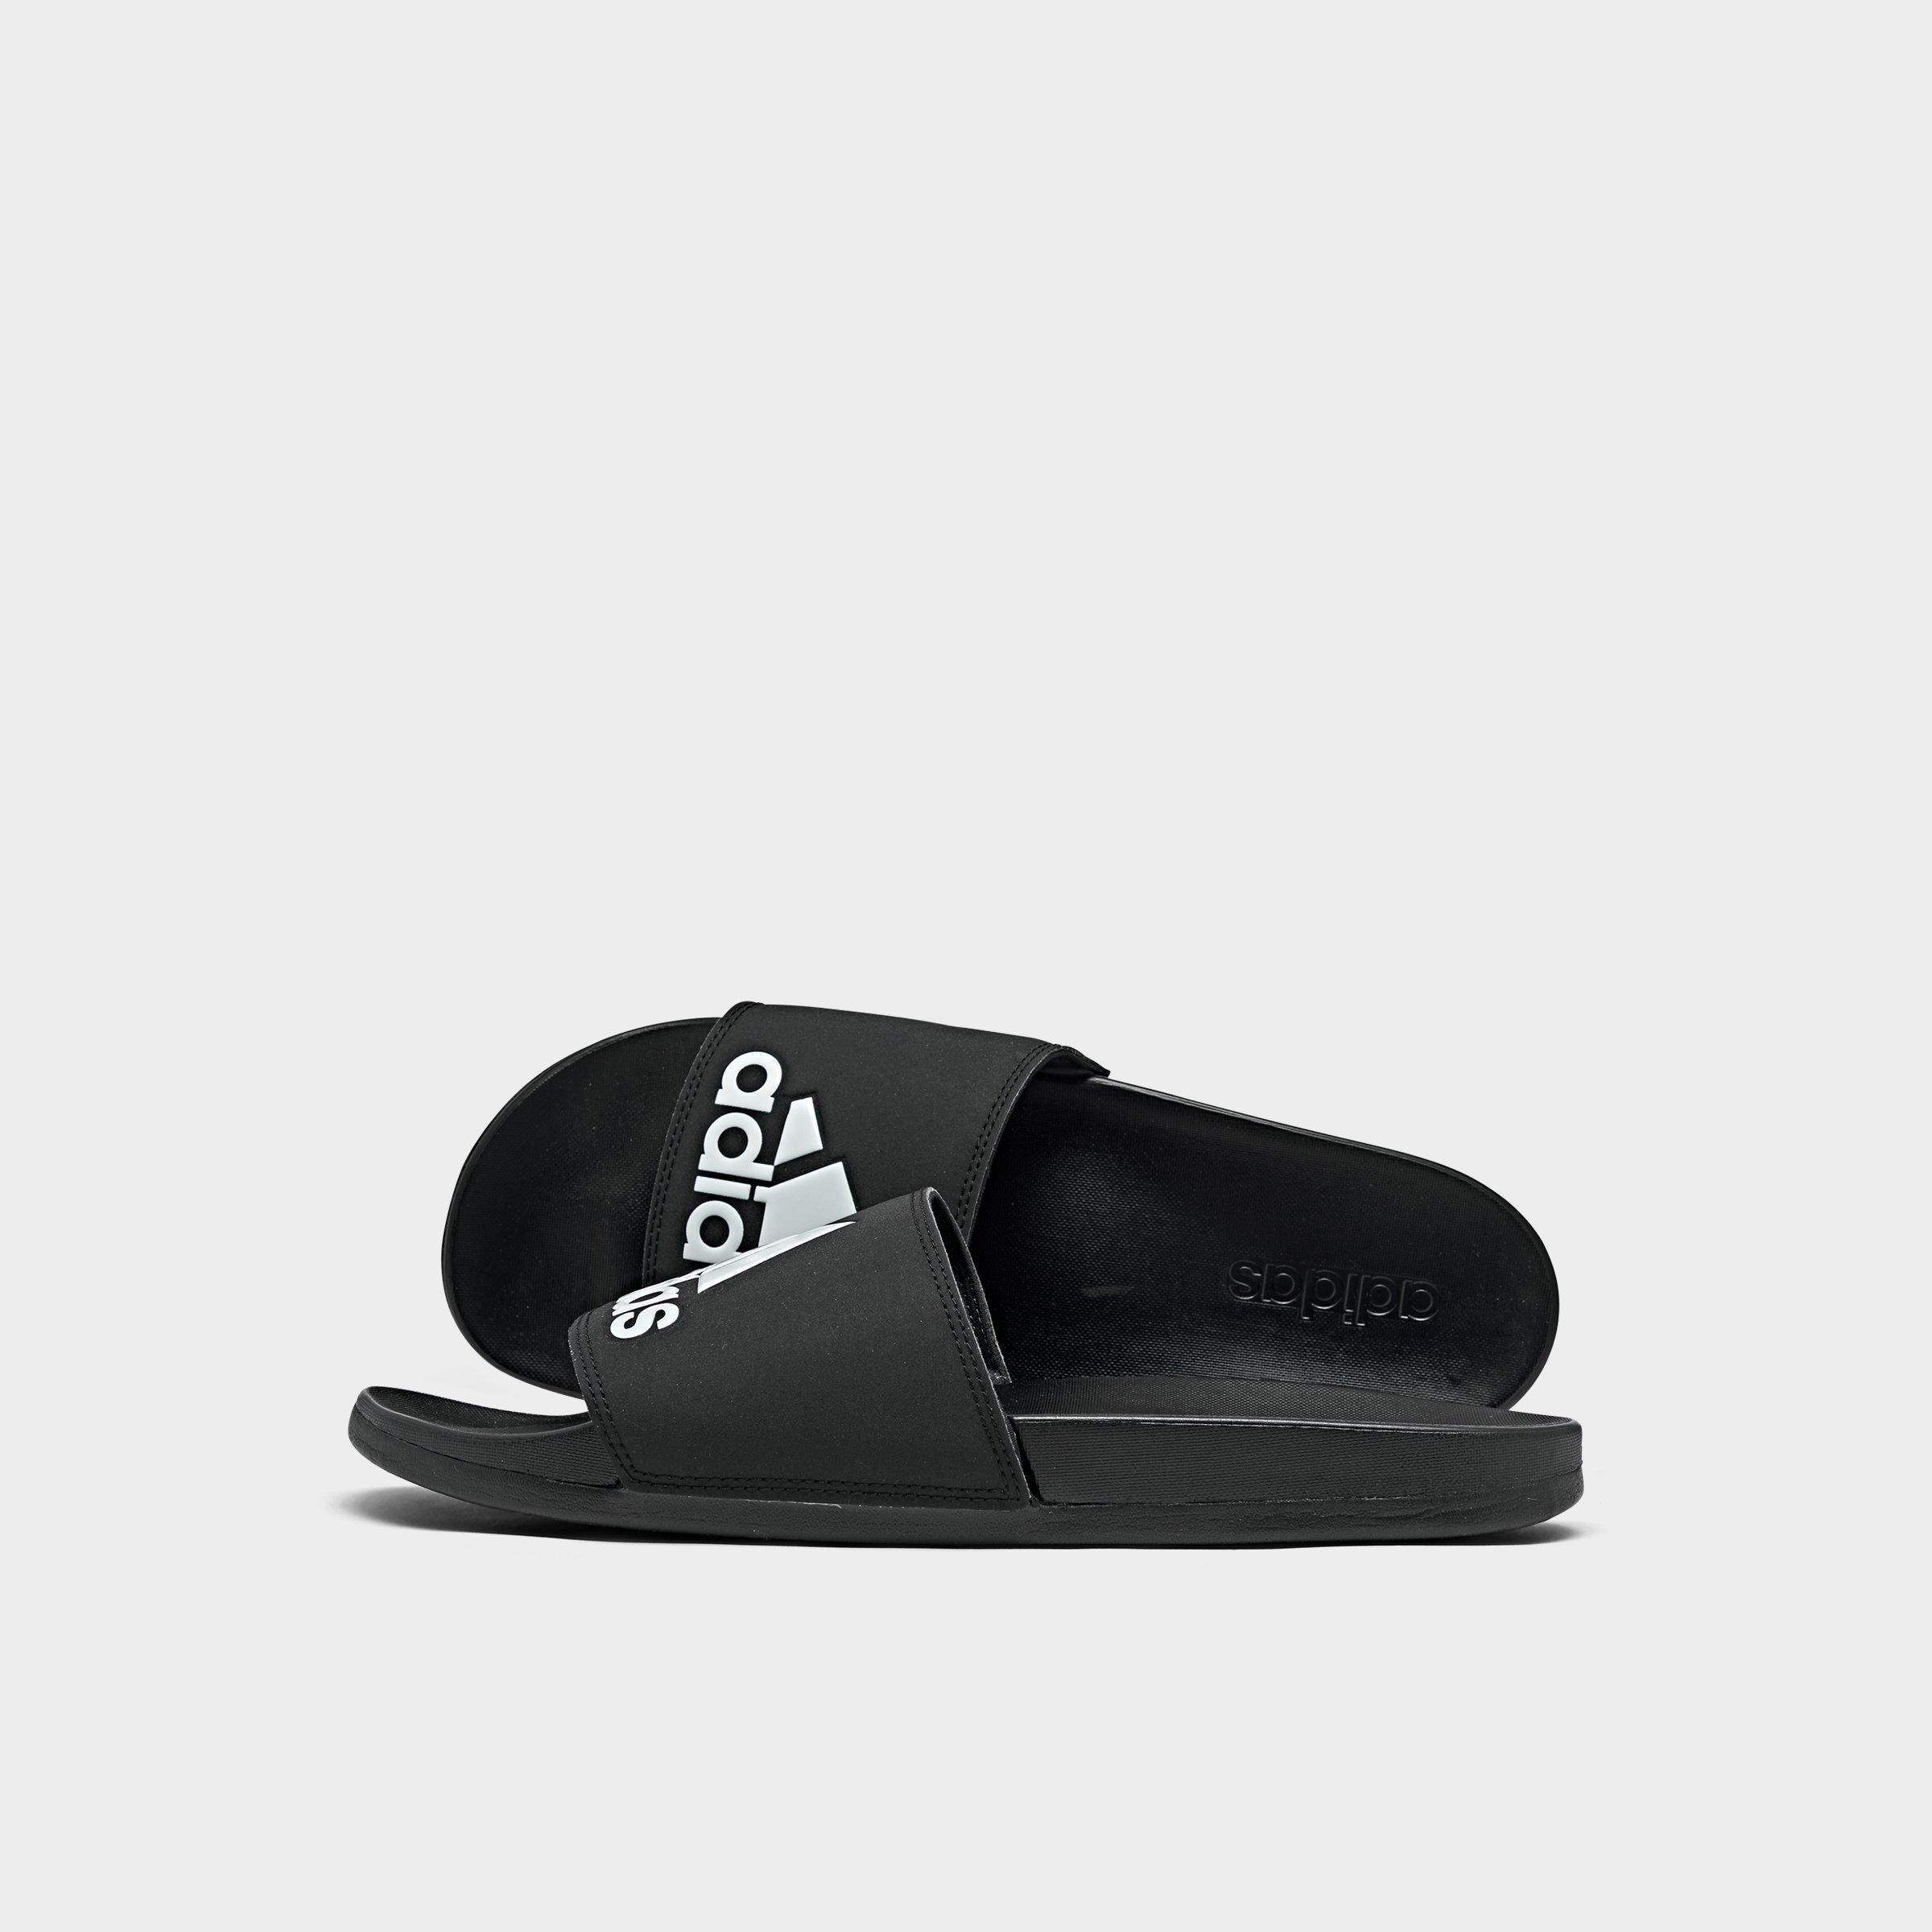 how much is adidas sandals